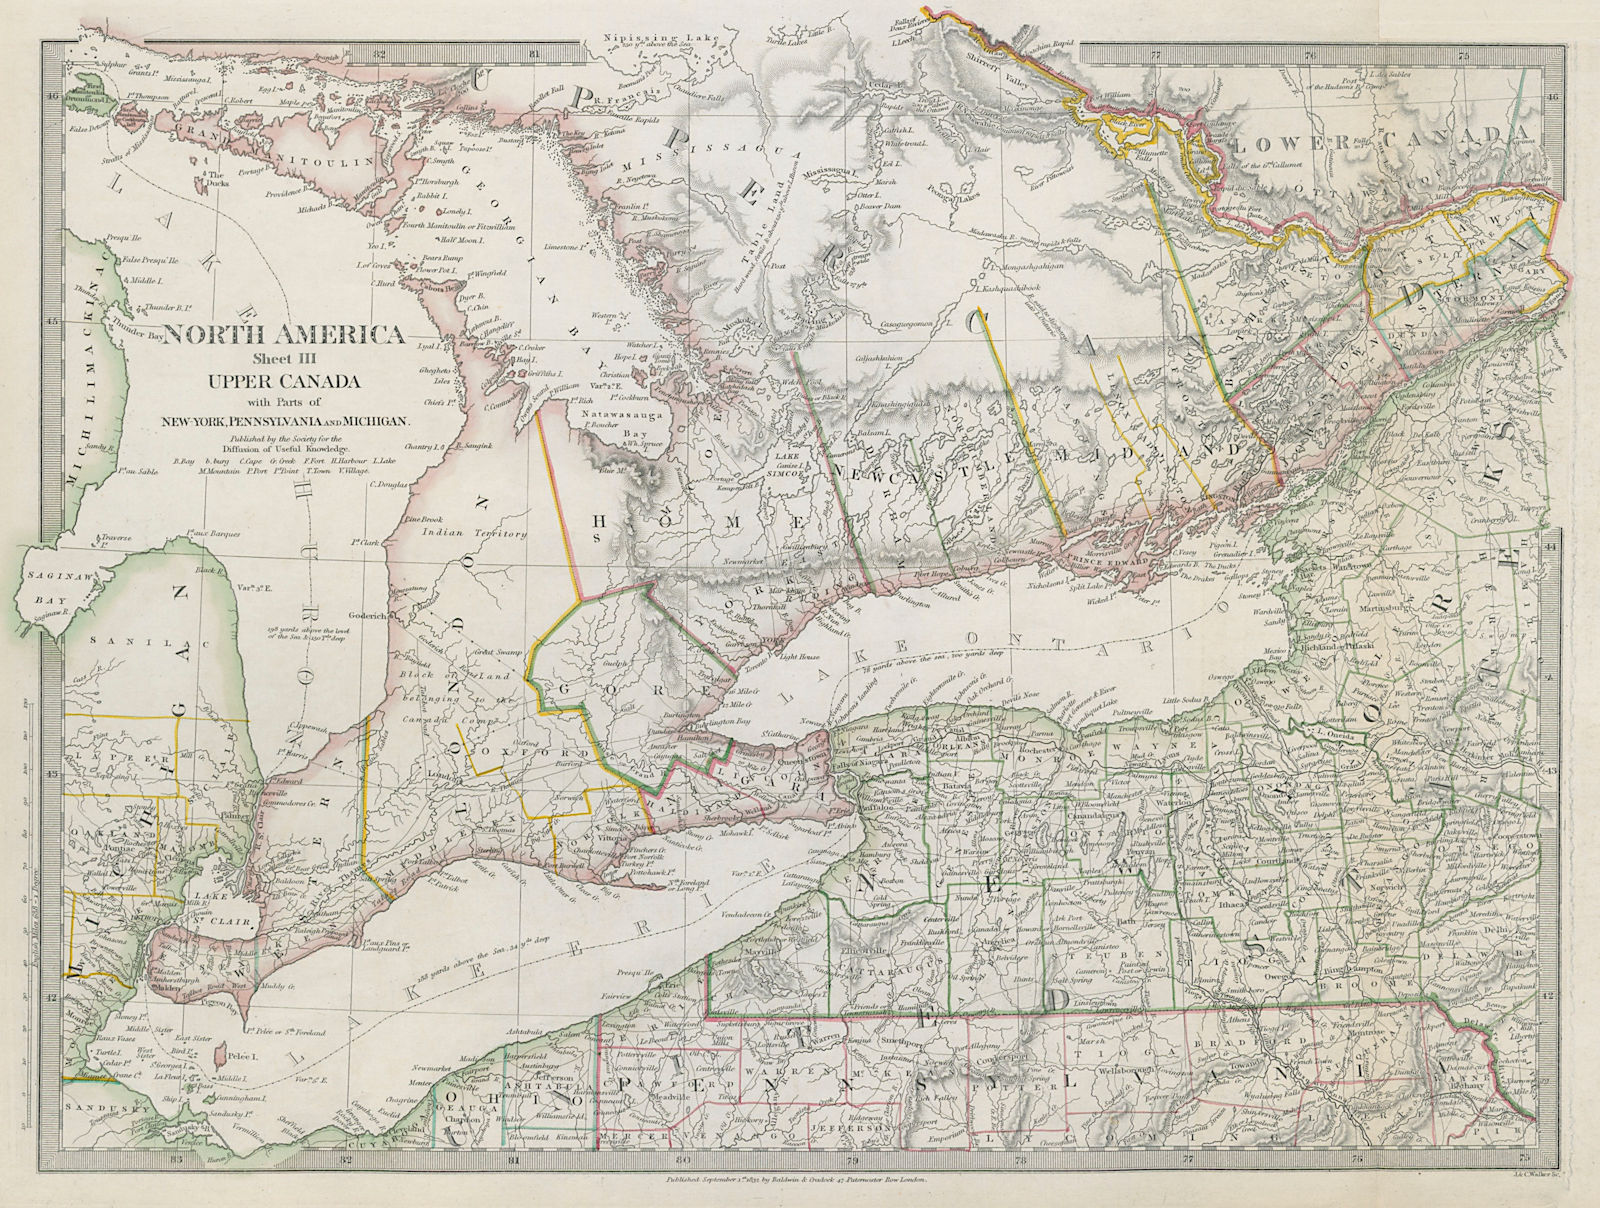 Associate Product GREAT LAKES Upper Canada <1849 districts Lake Ontario Huron Erie SDUK 1844 map